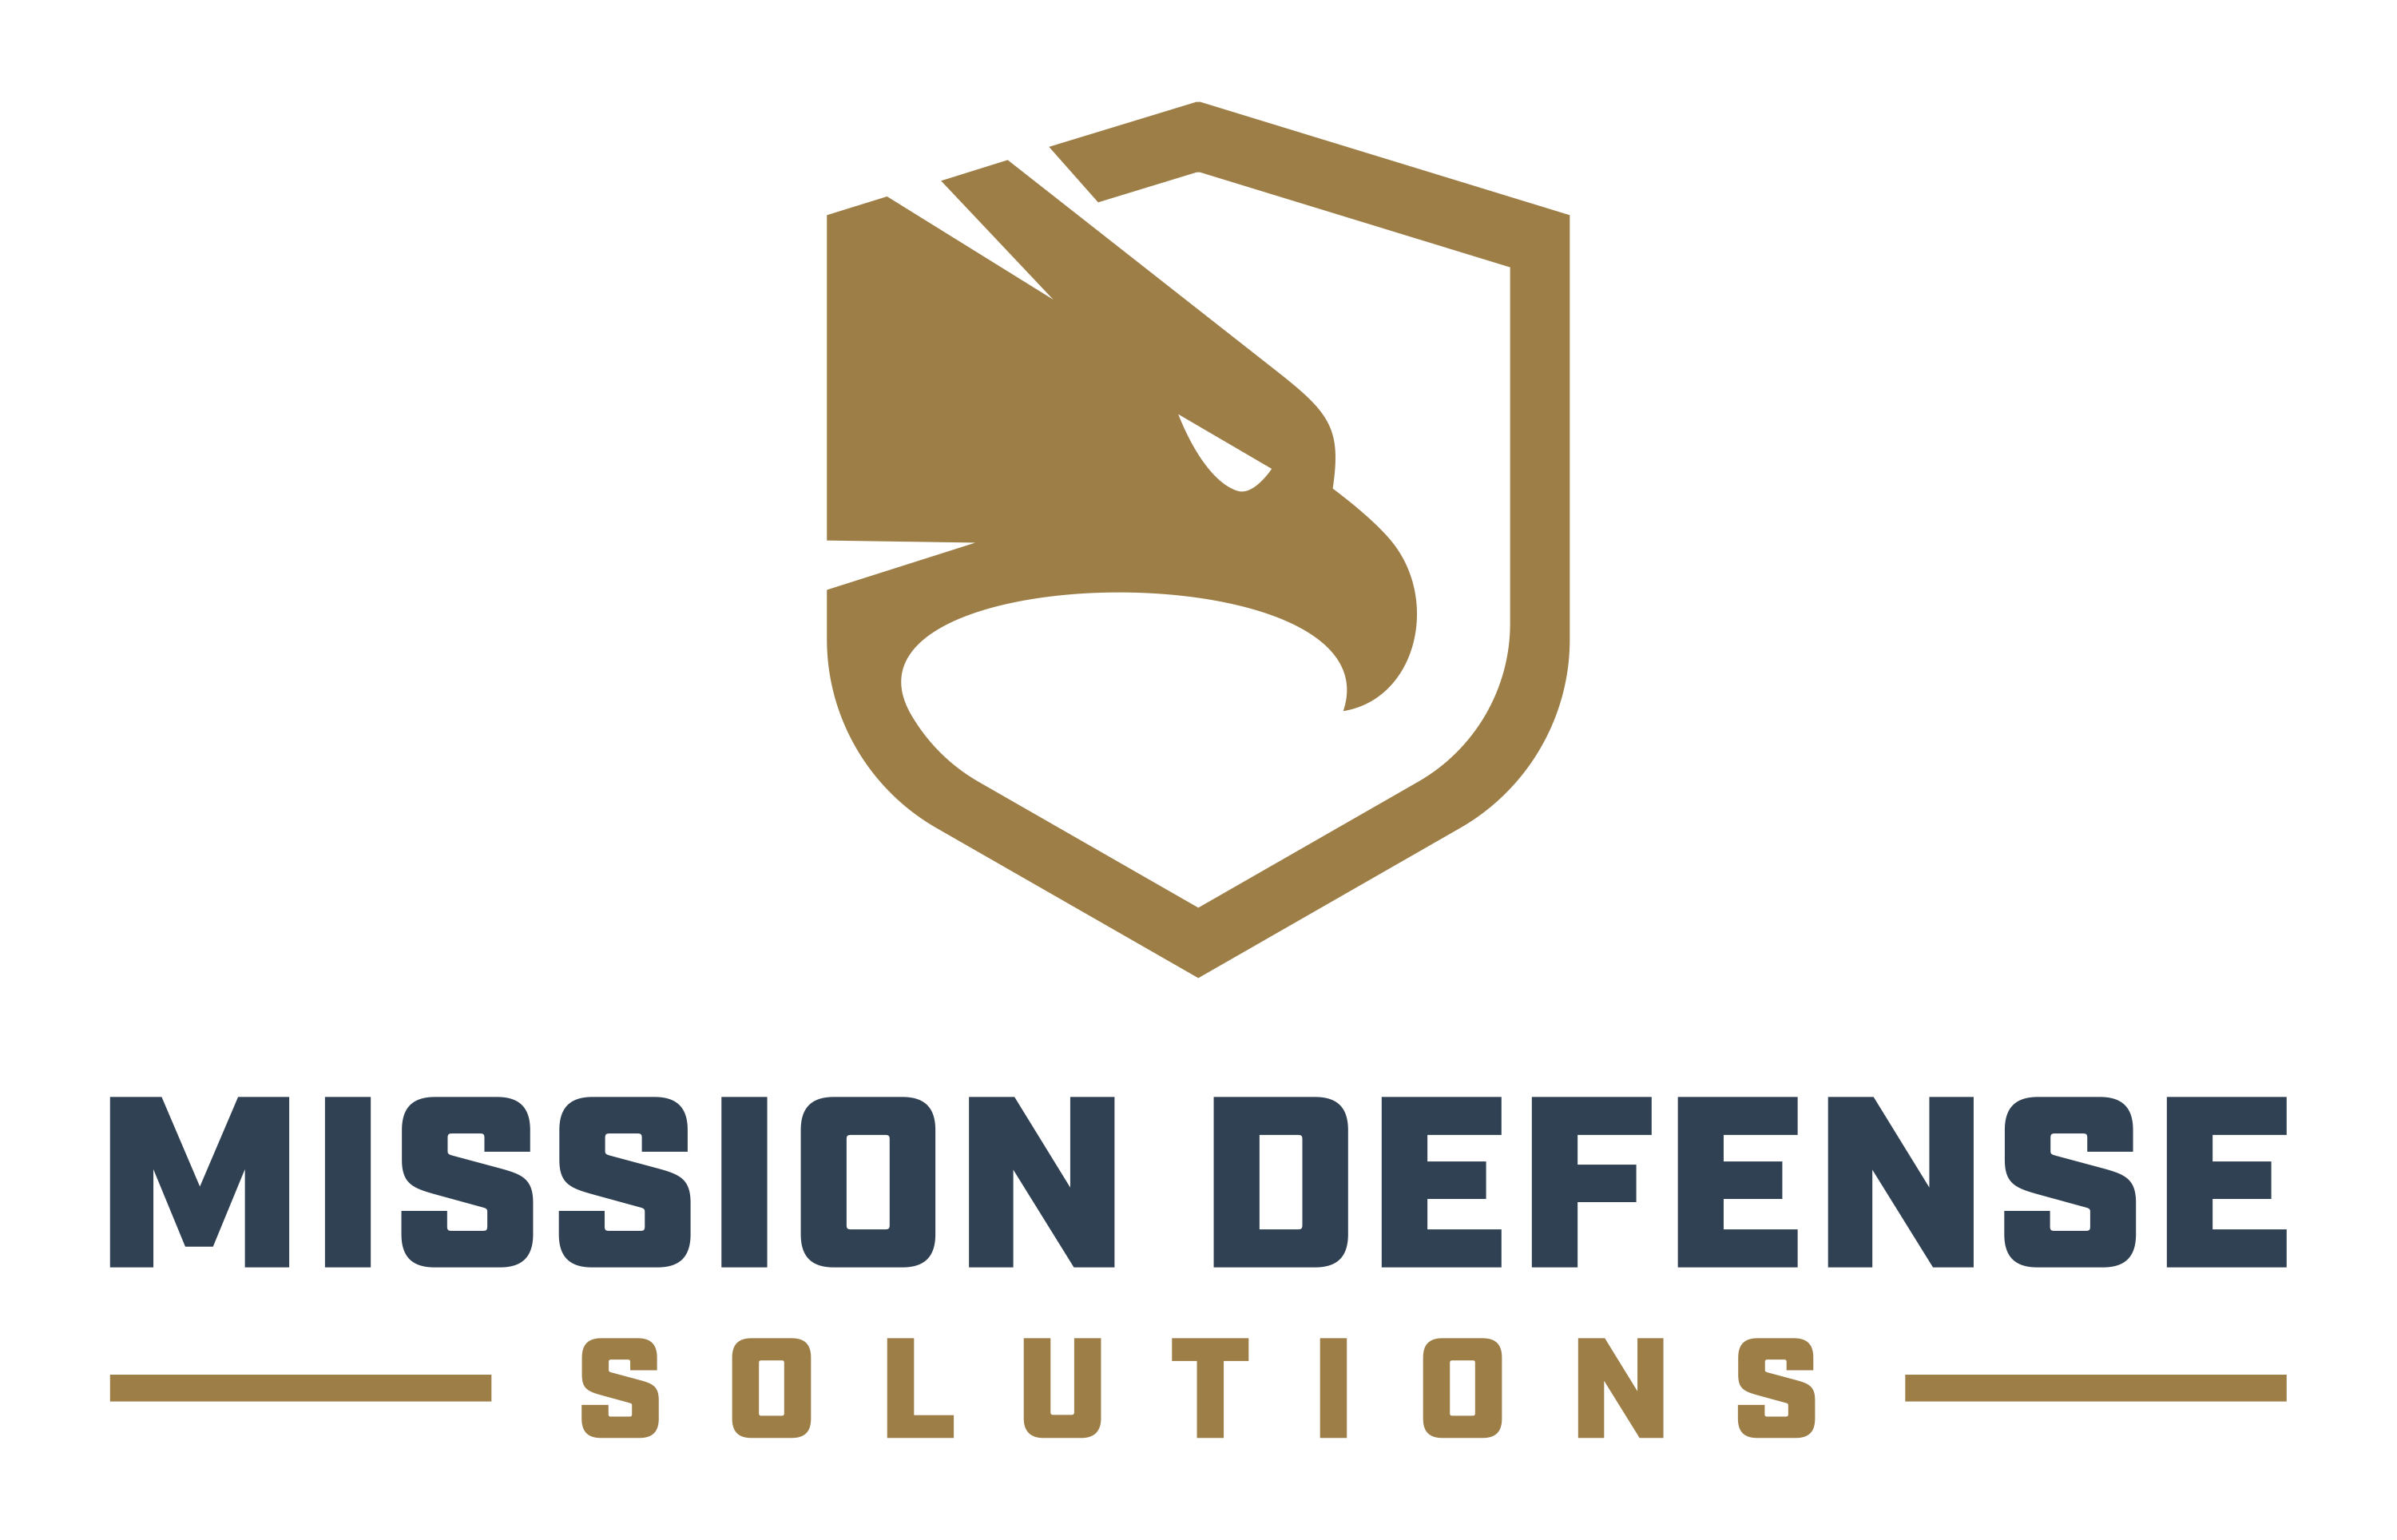 01 Mission Defense Solutions - logo tall clr - Primary